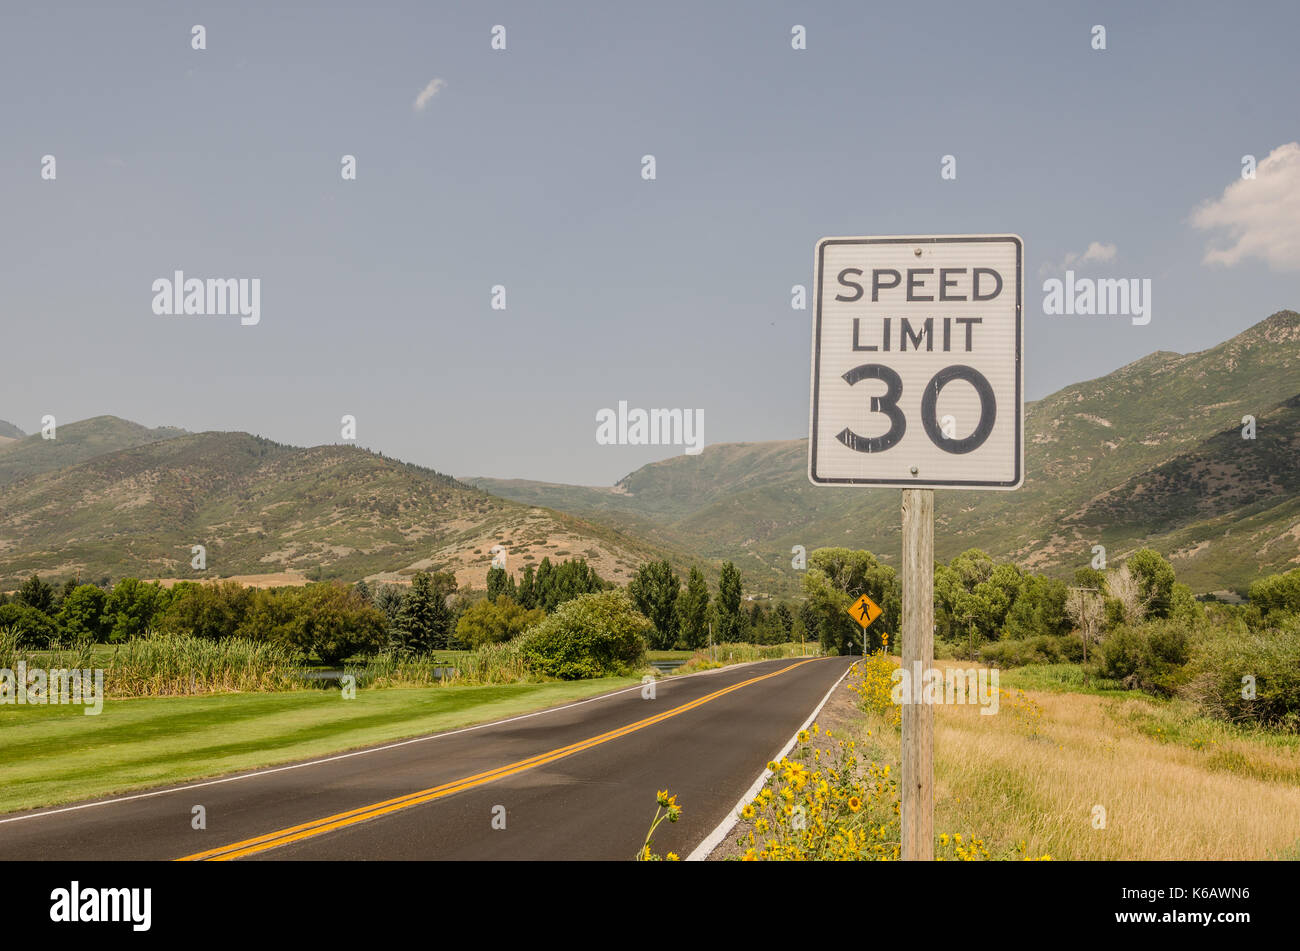 What looks to be a straight road has a sharp curve sign after the pedestrian crossing sign in this 30 mph speed limit area. Stock Photo